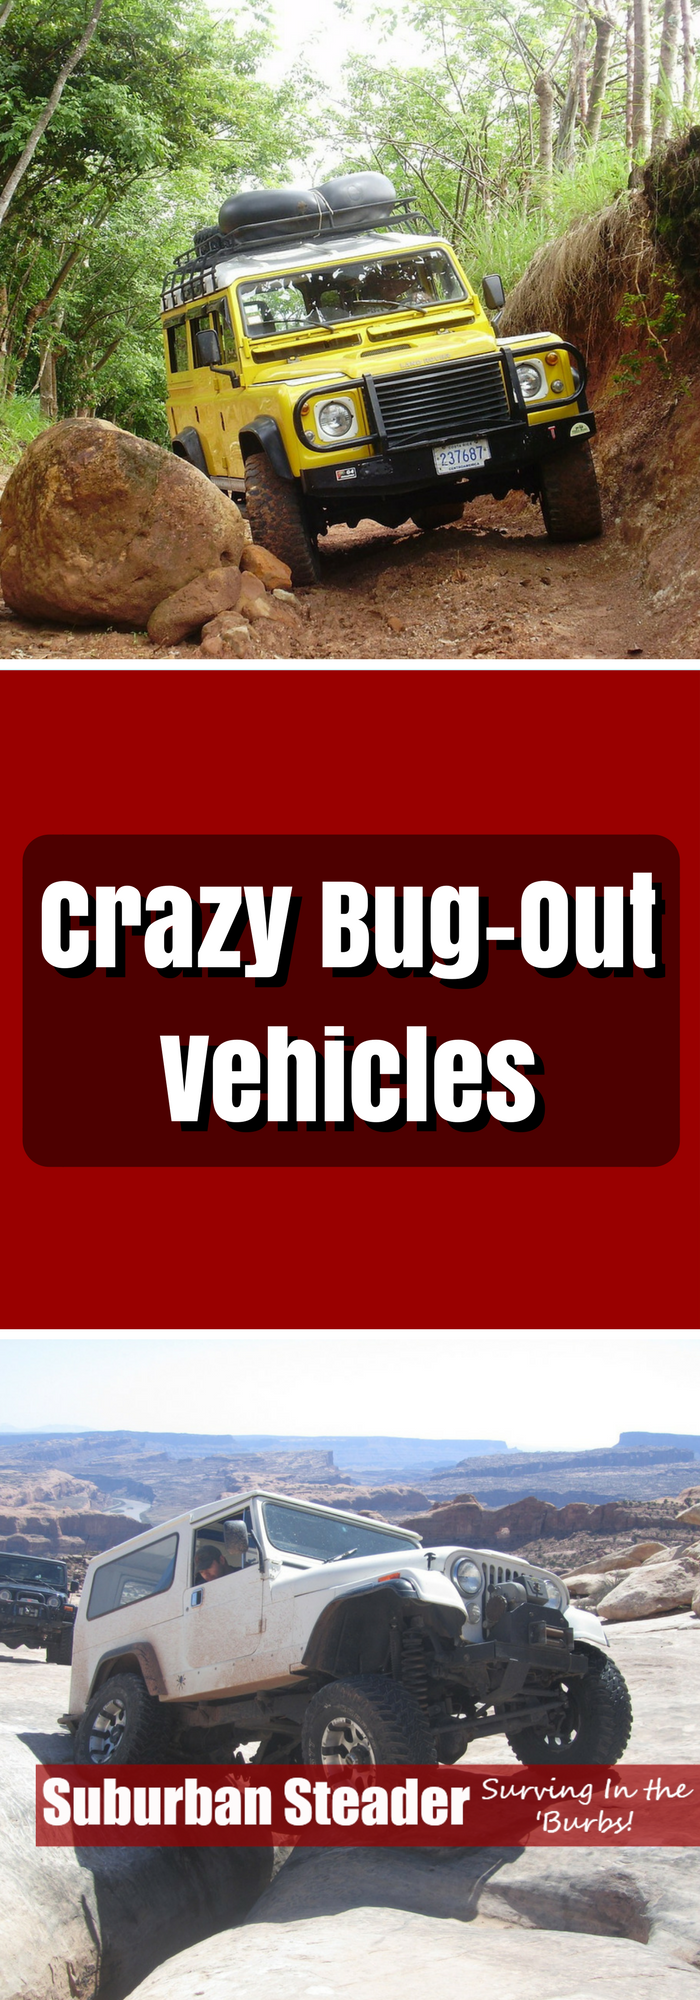 Crazy Bug-Out Vehicles